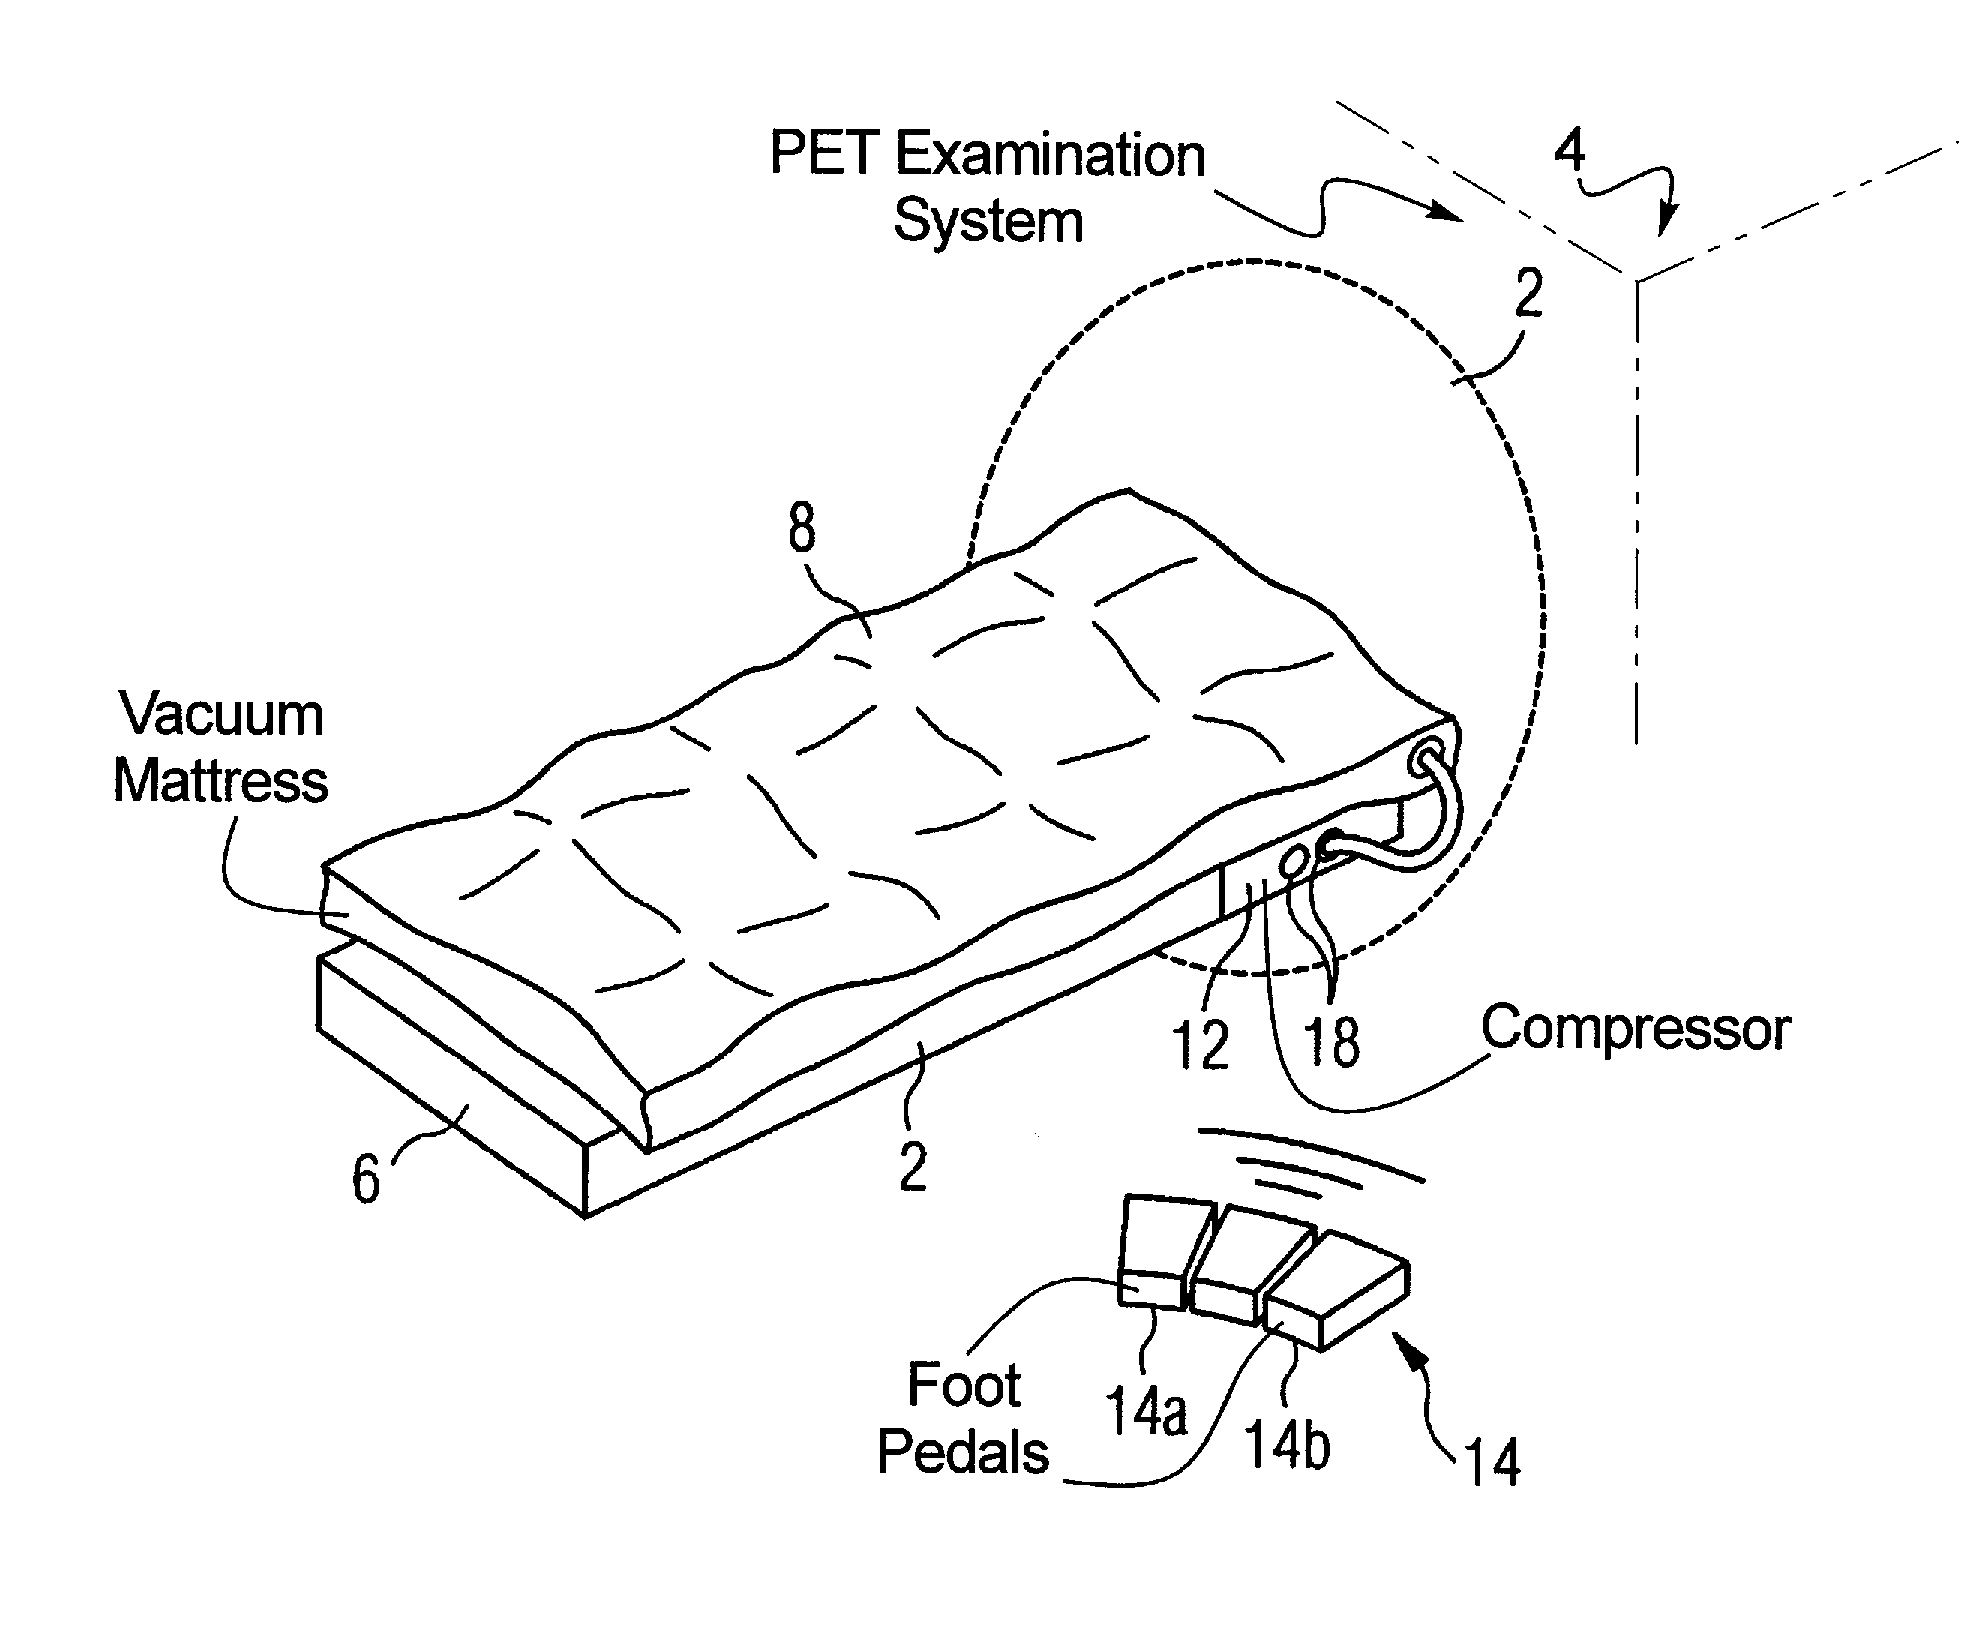 Device for supporting a patient in a pet examination